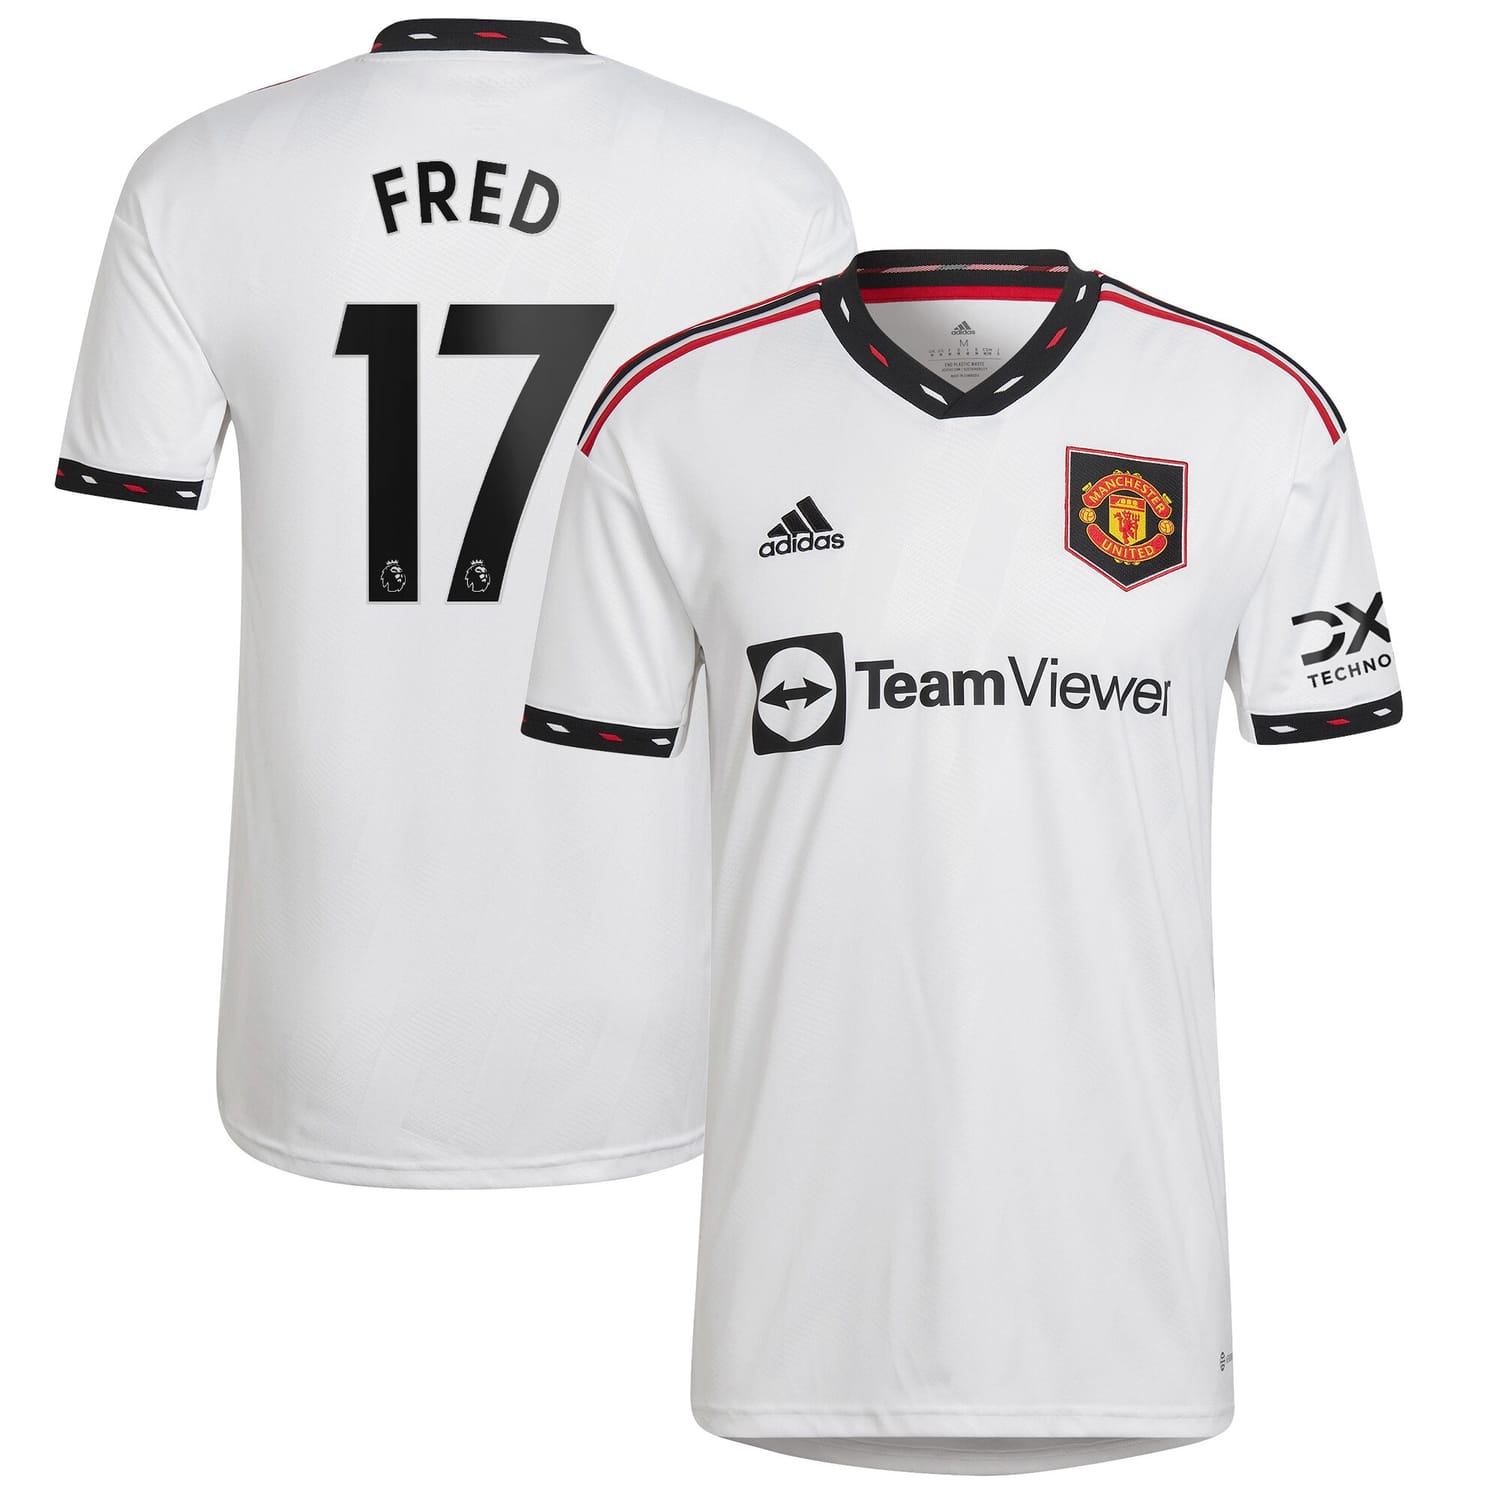 Premier League Manchester United Away Jersey Shirt 2022-23 player Fred 17 printing for Men